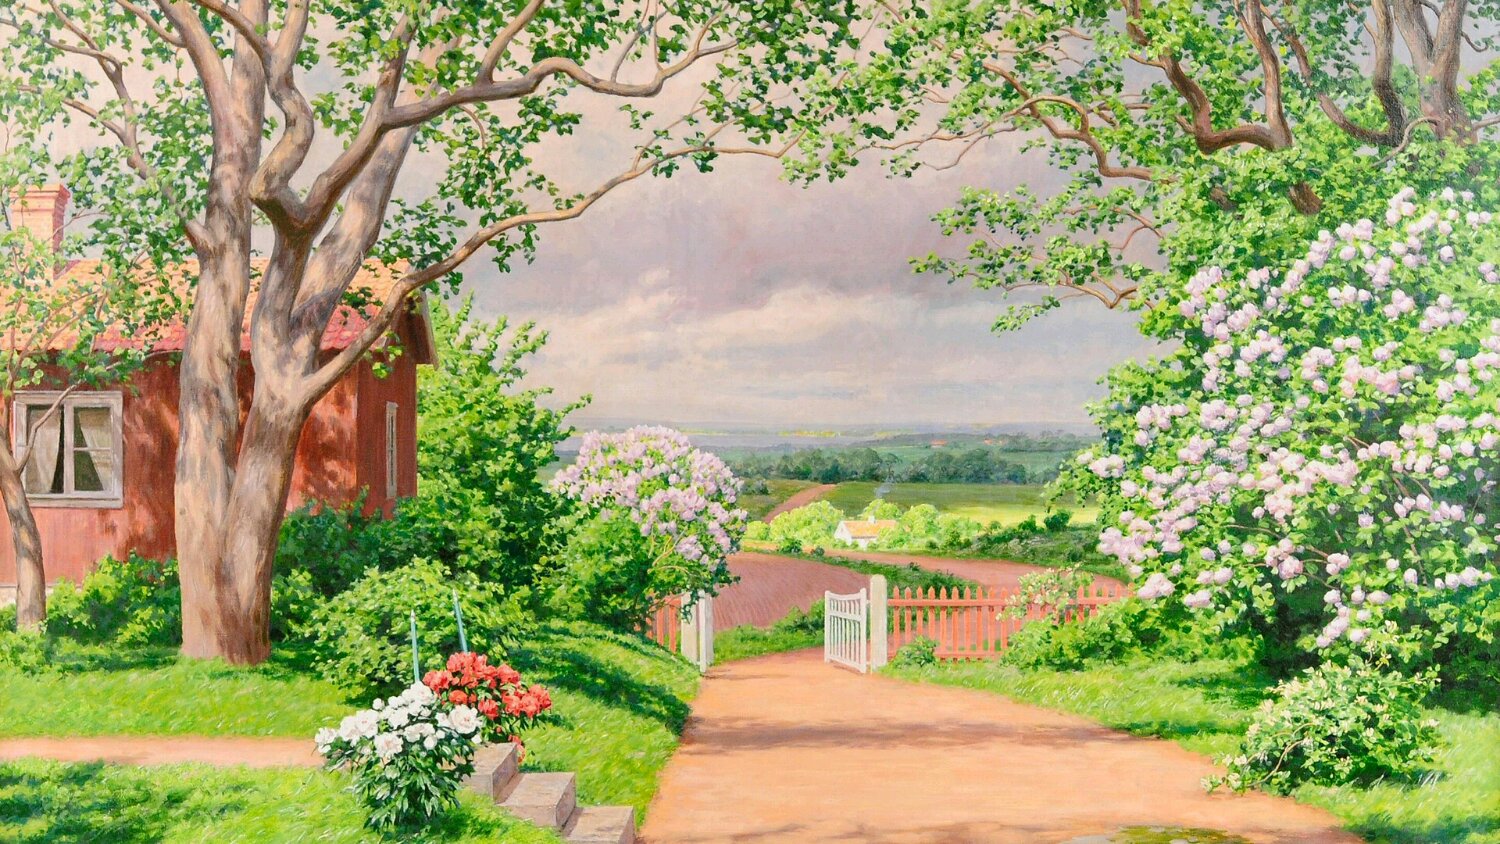 General 1500x844 garden plants house flowers trees grass clouds sky sunlight stairs fence